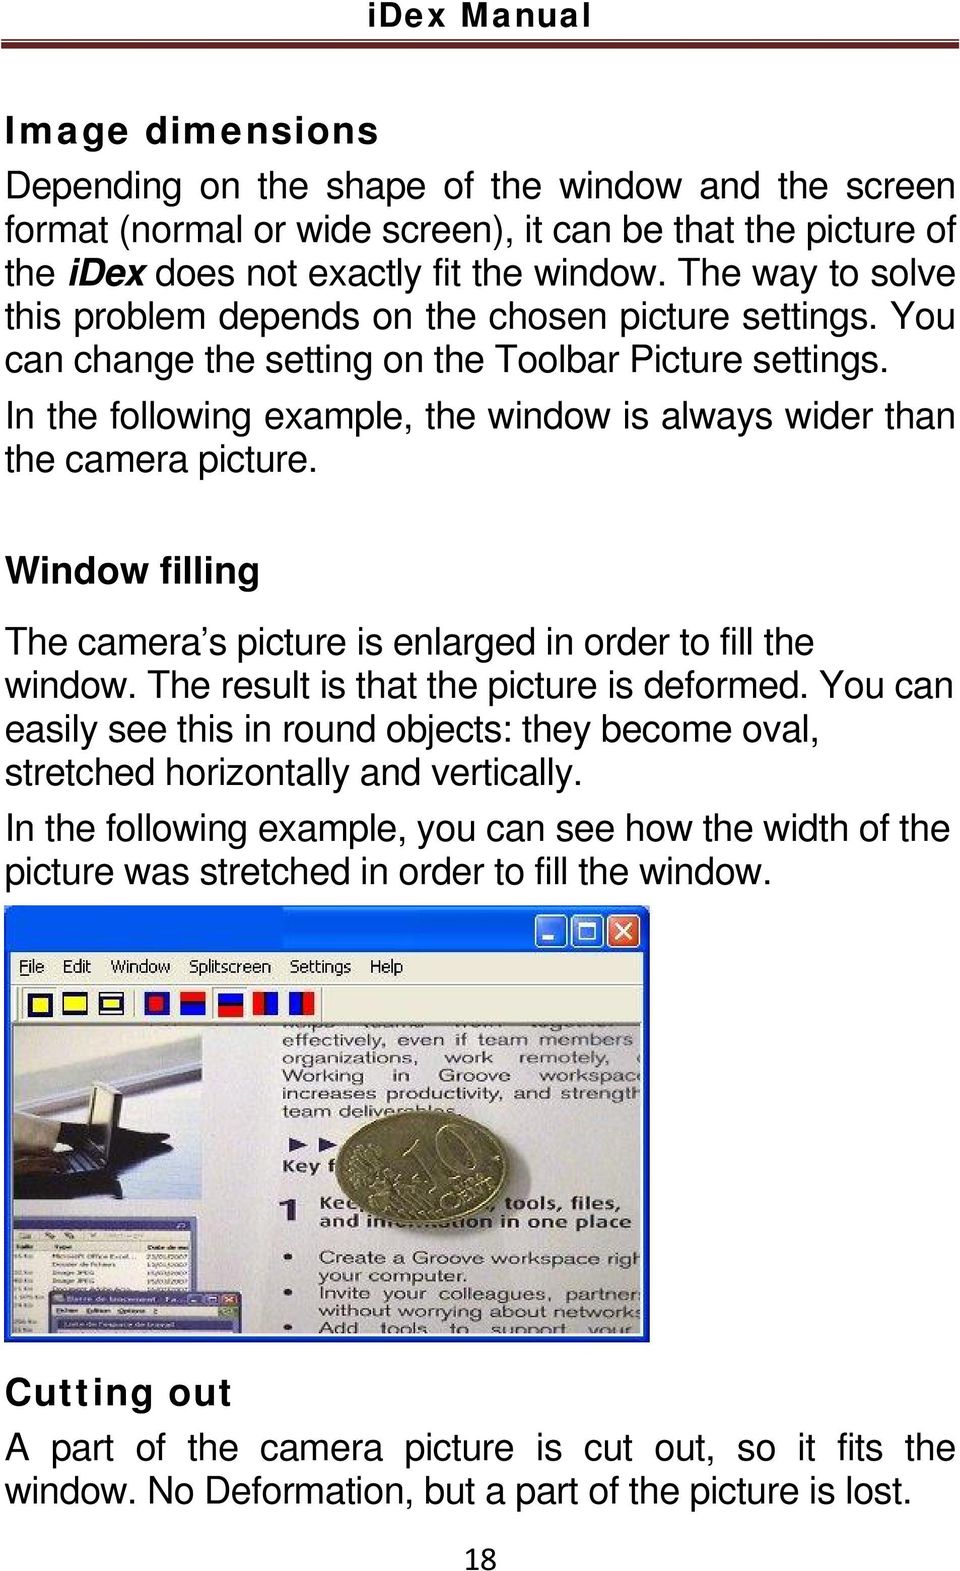 In the following example, the window is always wider than the camera picture. Window filling The camera s picture is enlarged in order to fill the window. The result is that the picture is deformed.